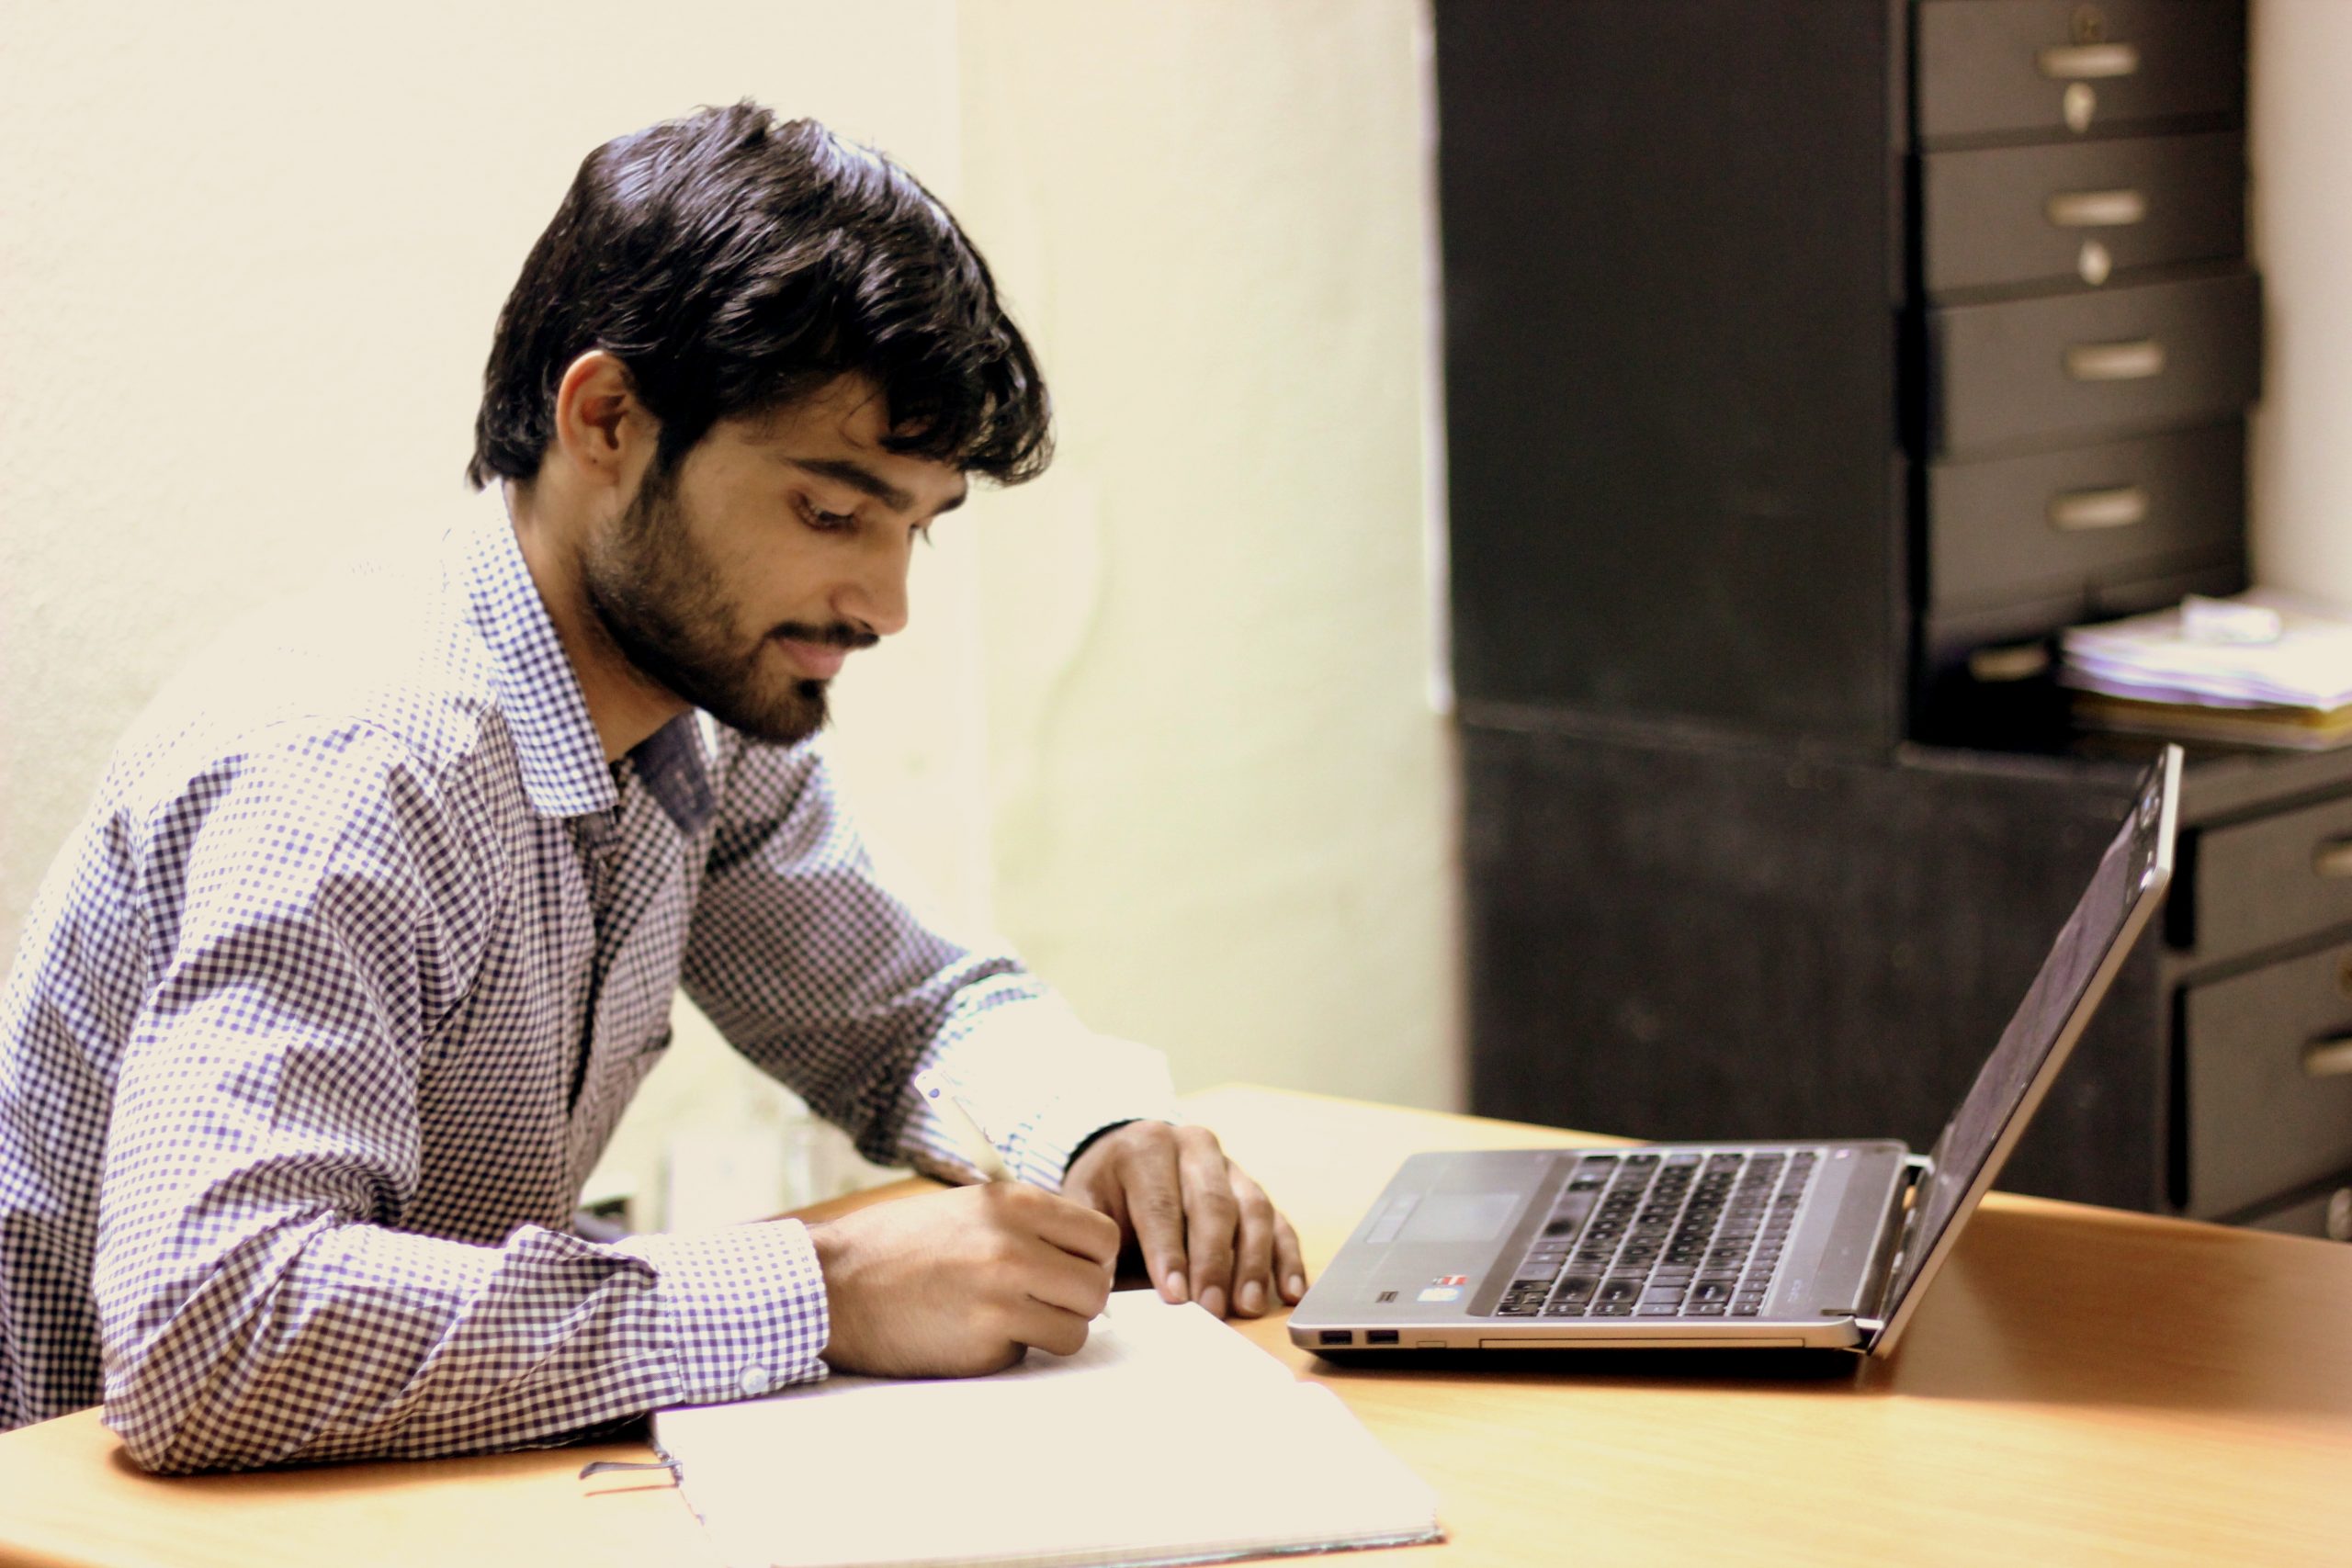 Descriptive image showing a man writing in a notebook while seated at a laptop.